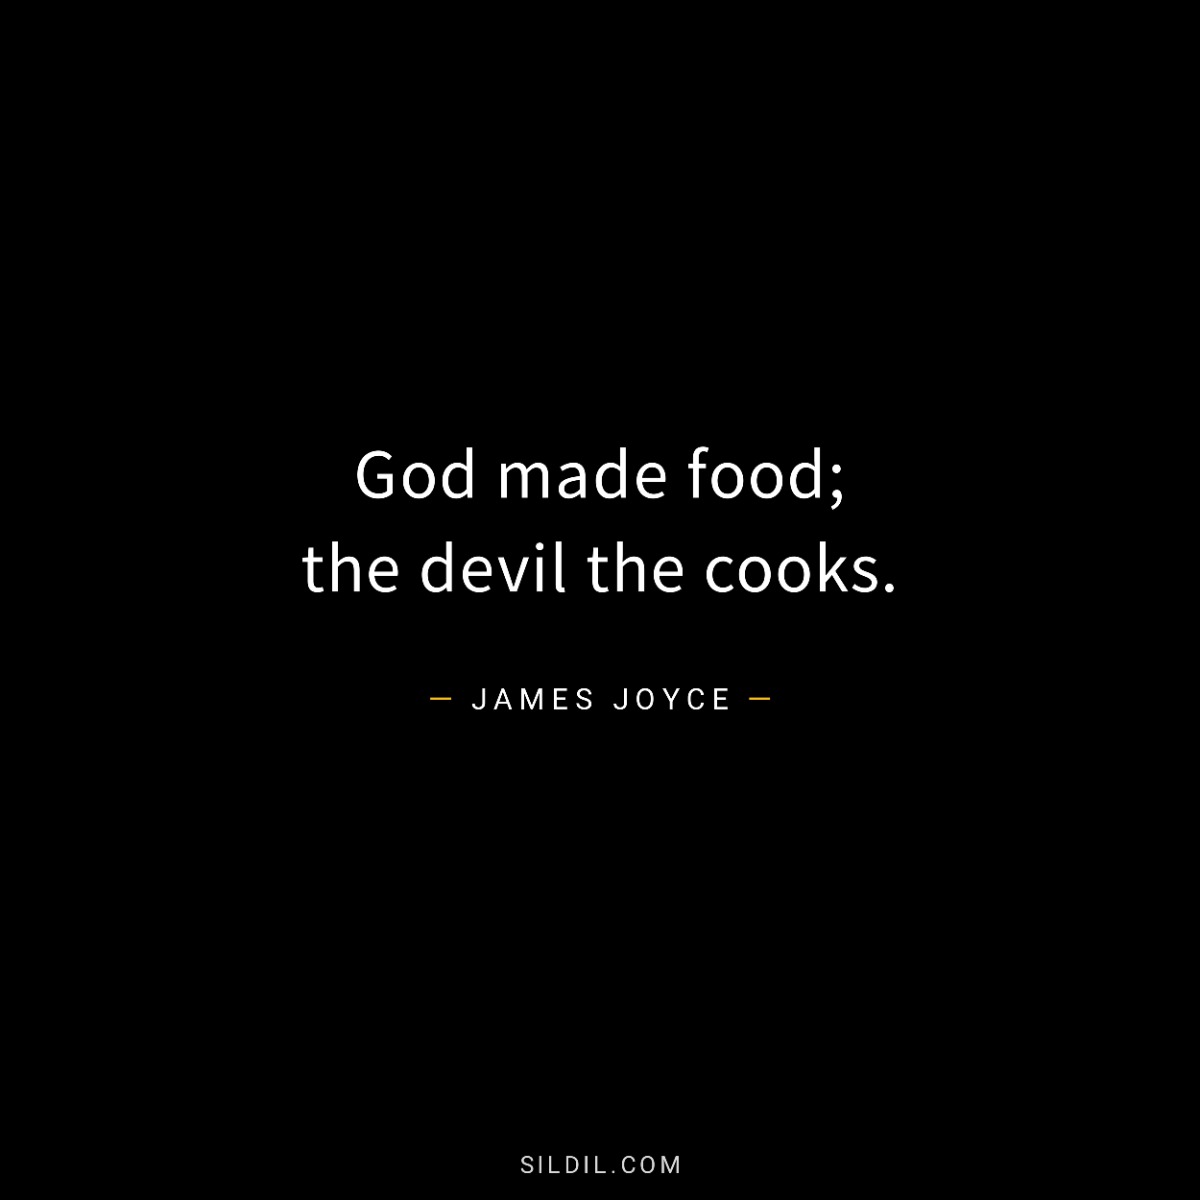 God made food; the devil the cooks.